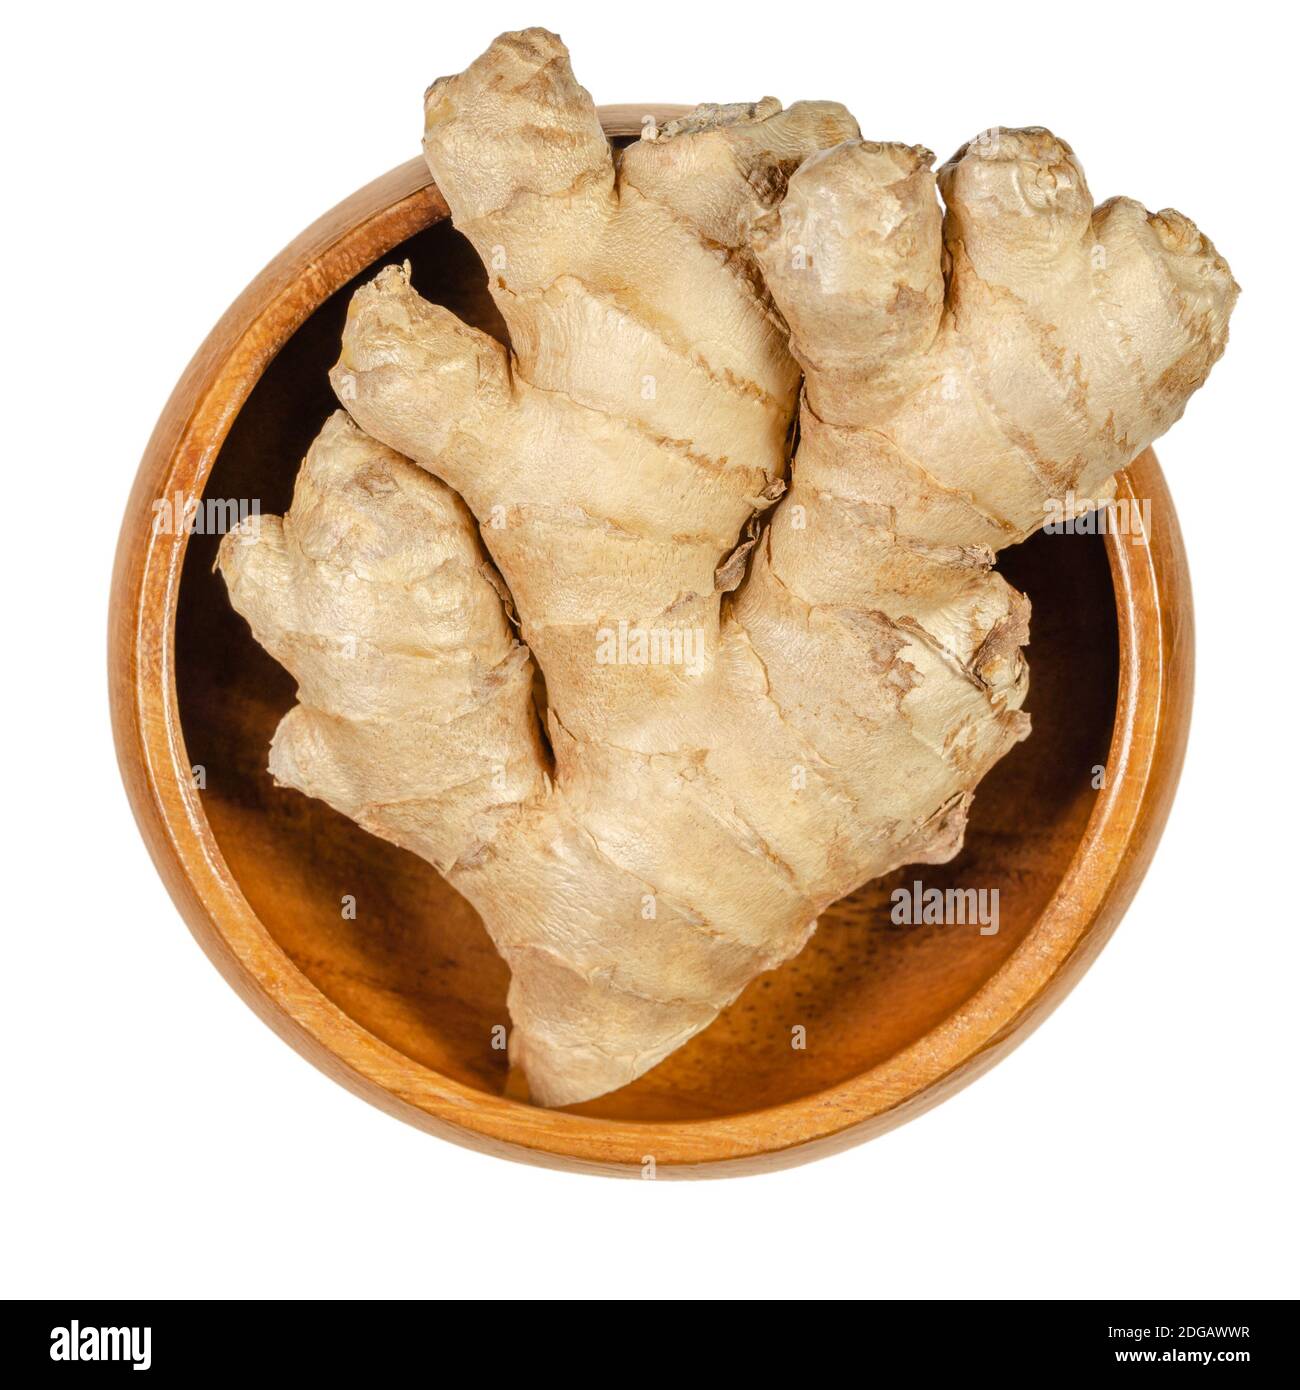 Fresh ginger root in a wooden bowl. Juicy and fleshy rhizome of Zingiber officinale, used as a fragrant kitchen spice and as folk medicine. Stock Photo